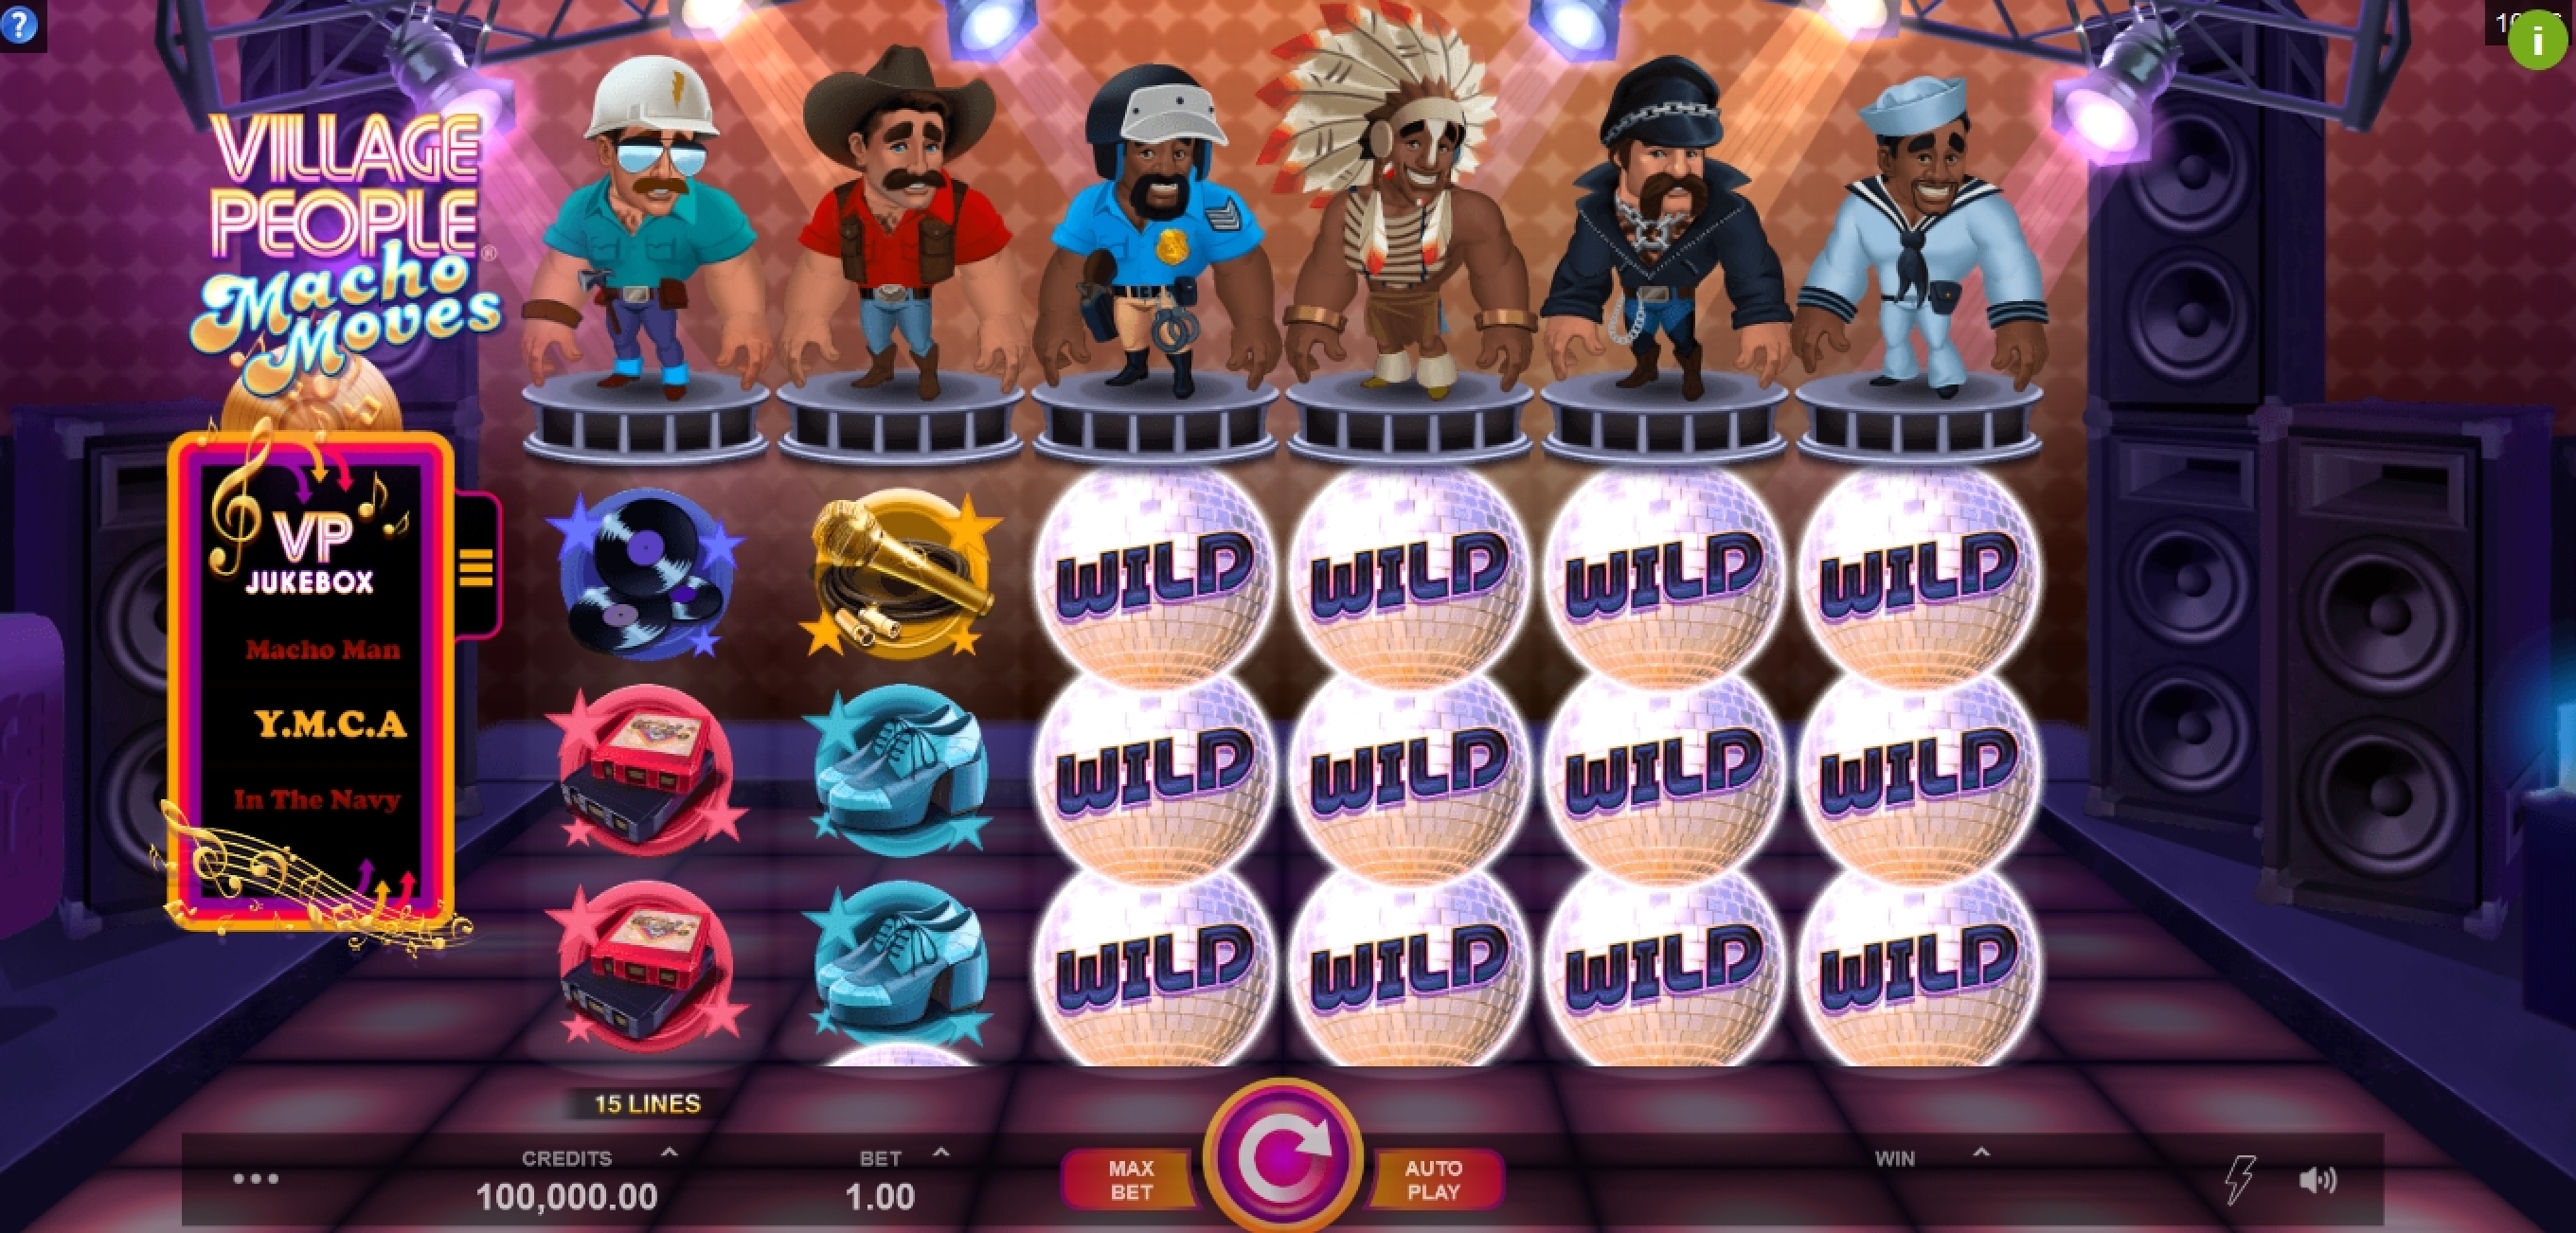 Reels in Village People Macho Moves Slot Game by Fortune Factory Studios